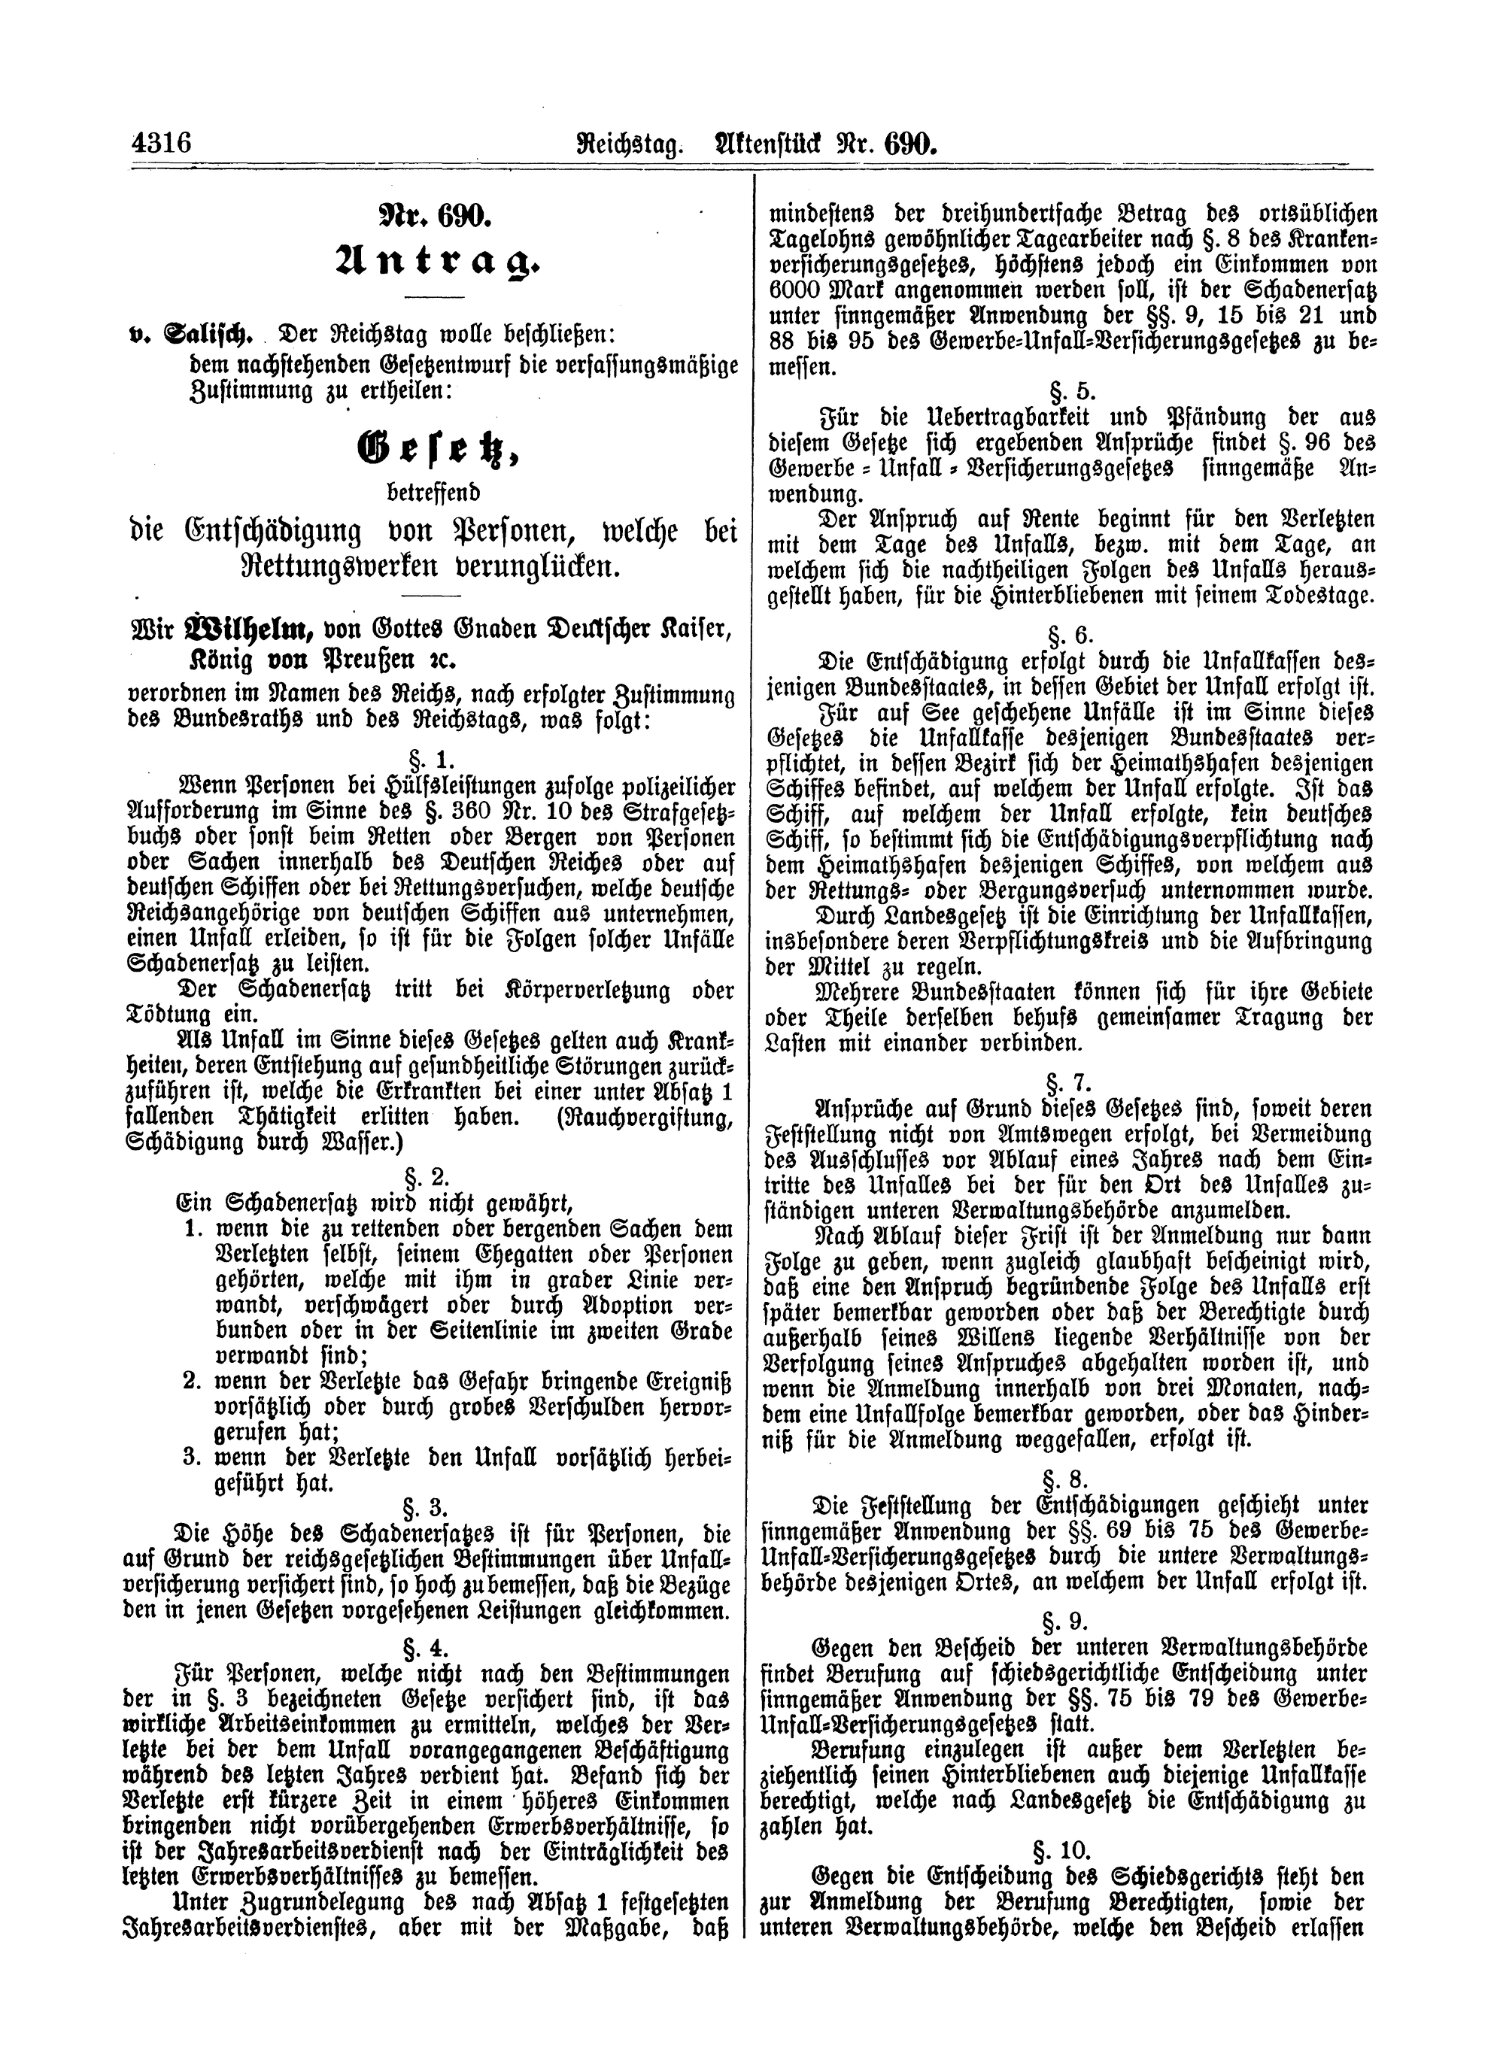 Scan of page 4316